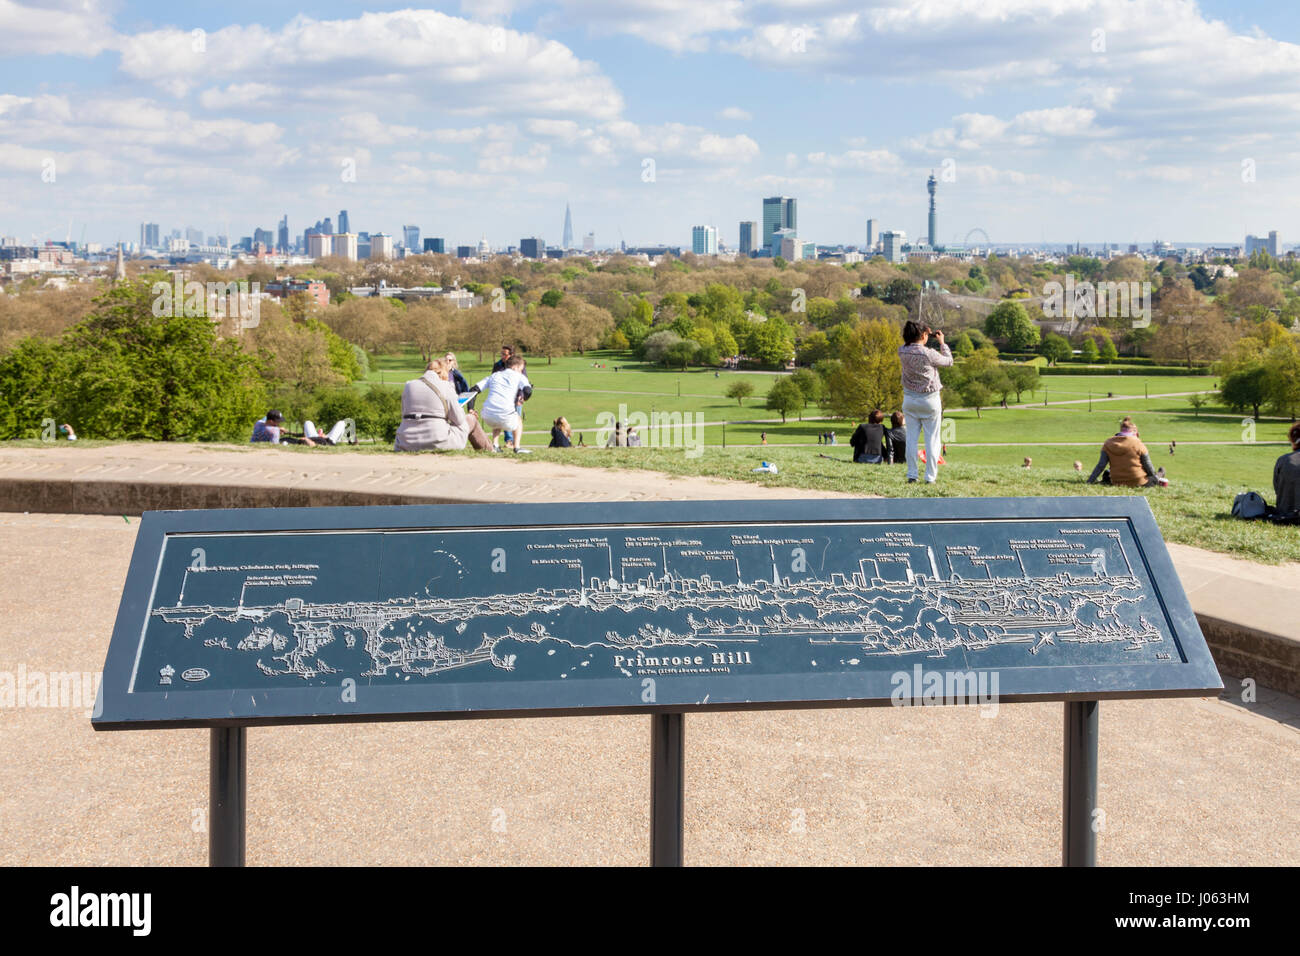 Viewing or observation point showing an outline, information and details of the view of the London skyline from Primrose Hill, London, England, UK Stock Photo